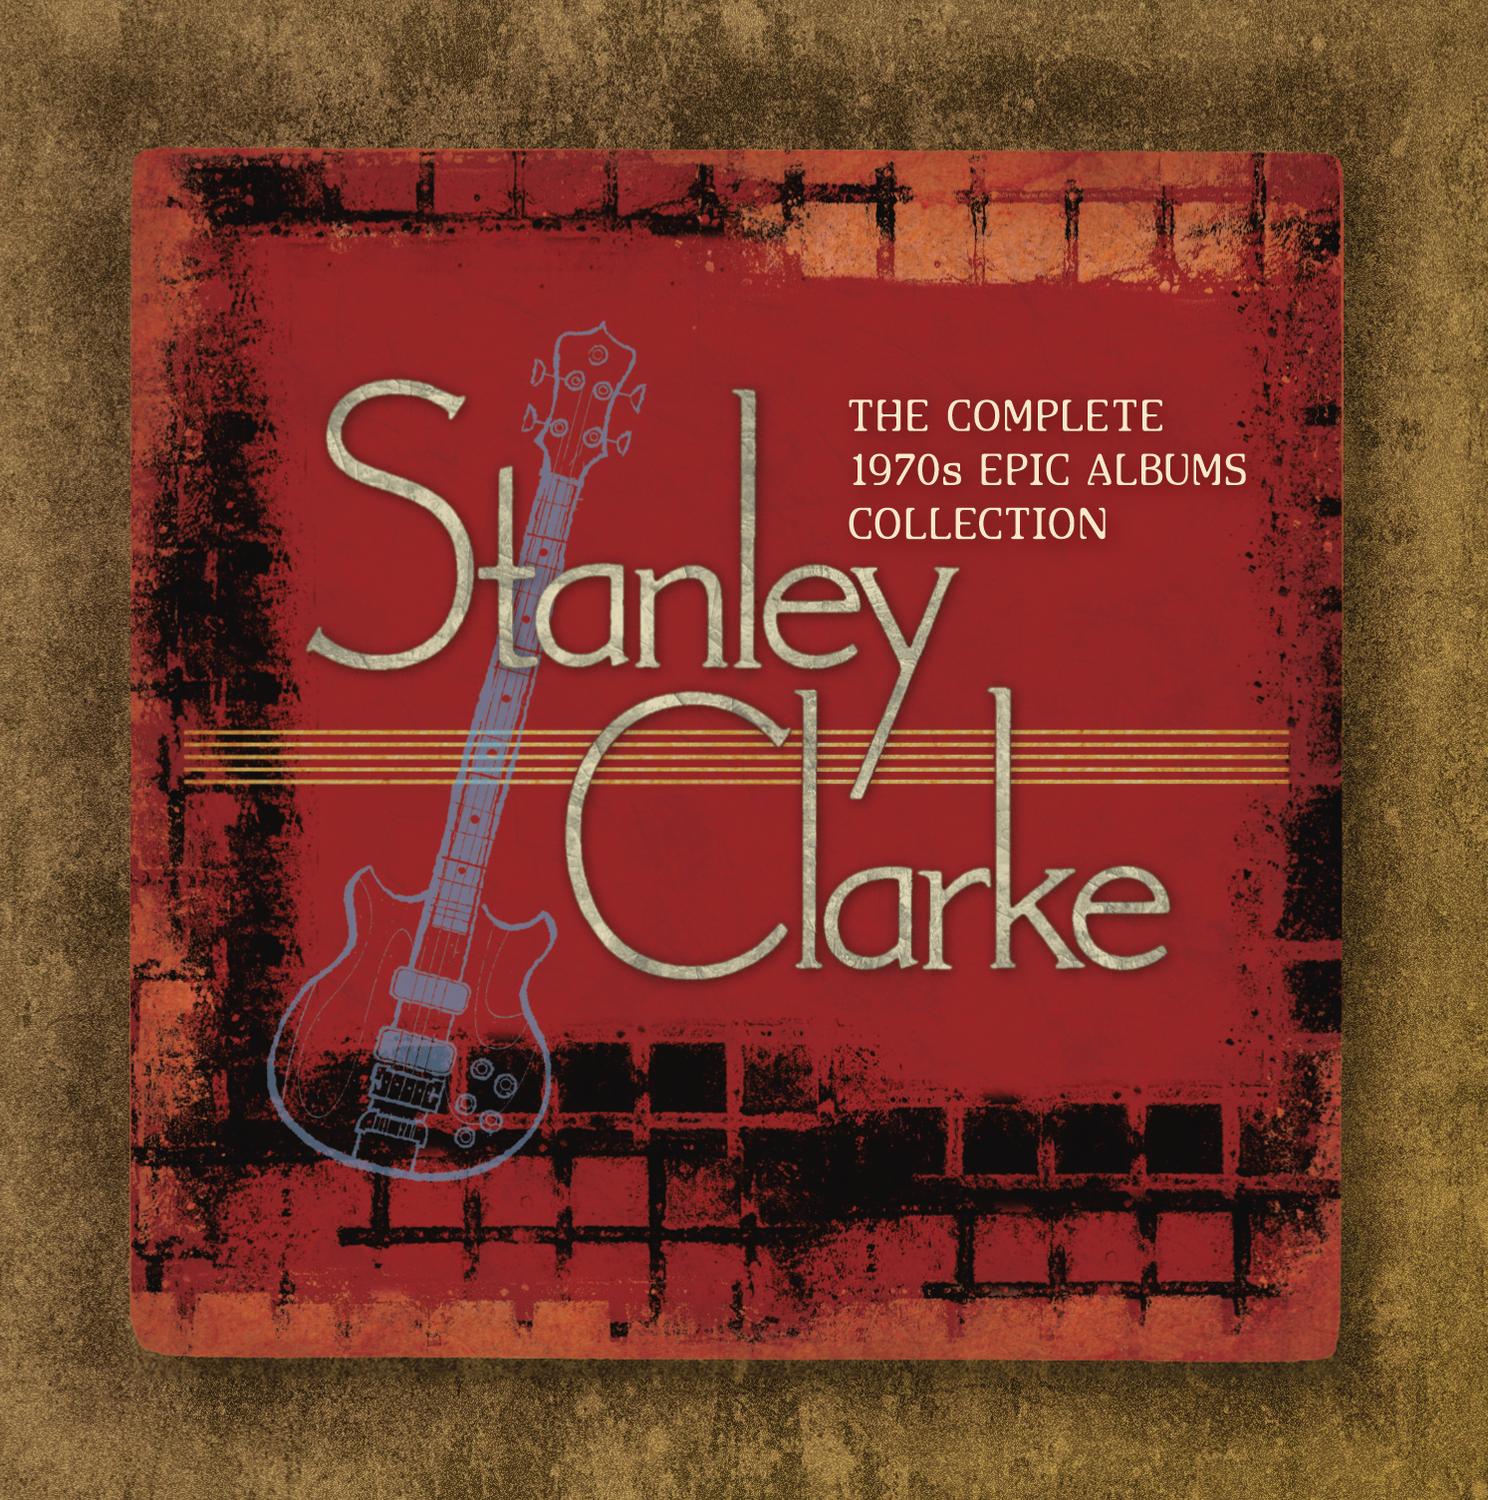 The Complete Stanley Clarke 1970s Epic Albums Collection